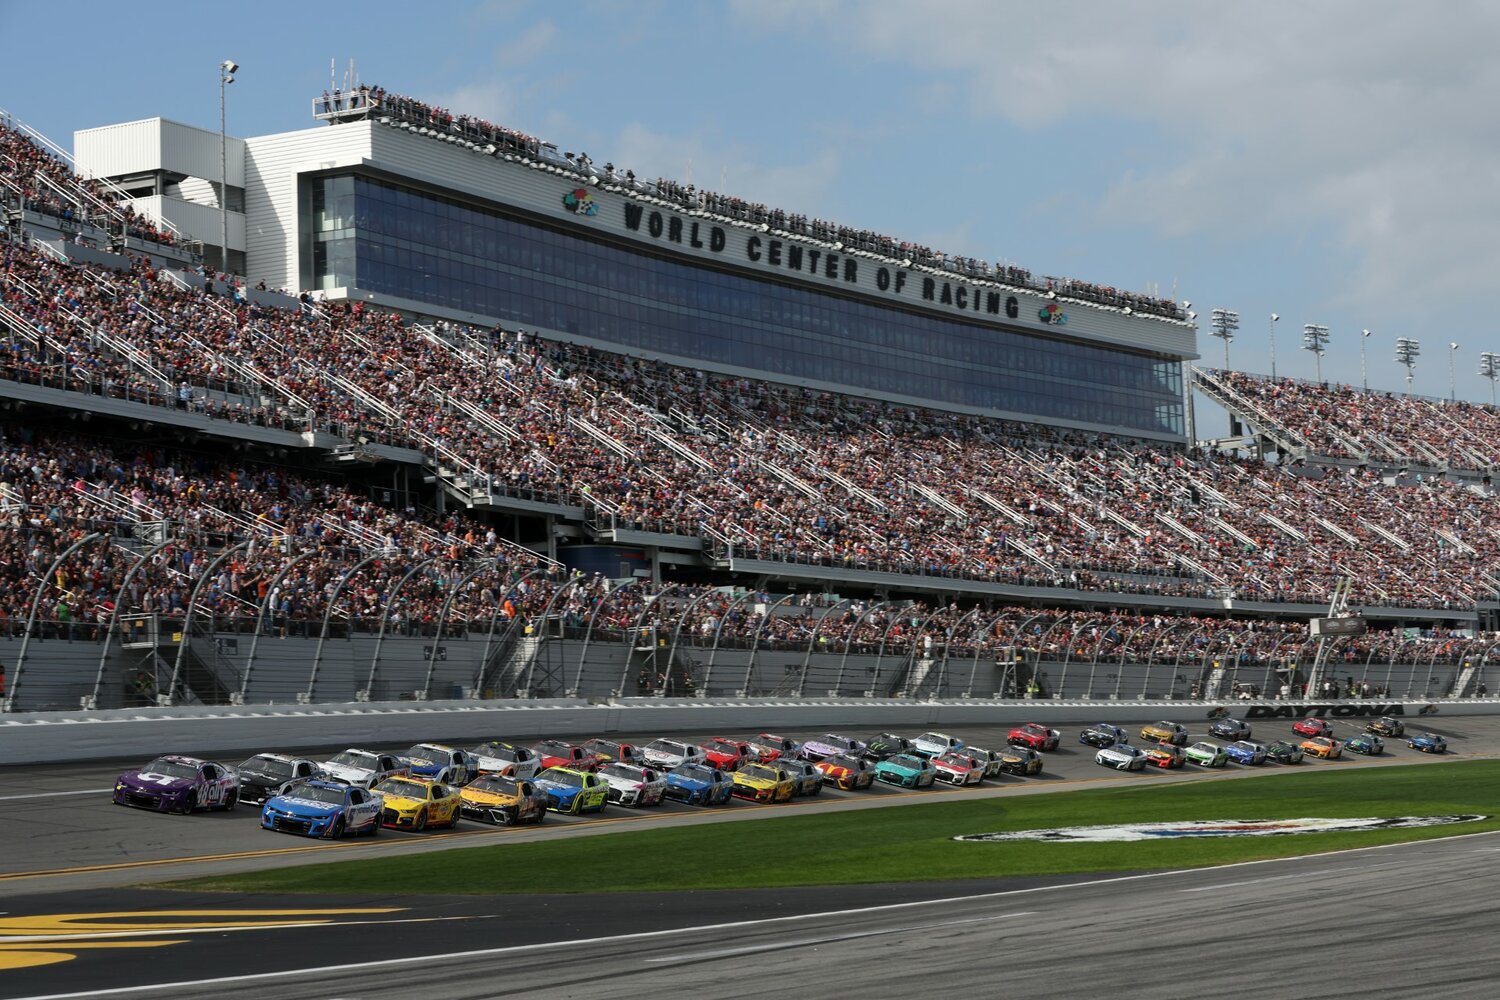 All 101,500 seats and every camping spot are sold out at the Daytona International Speedway ahead of the Feb. 18 Daytona 500, where a field of 40 will take the checkered flag at 2:30 p.m., hoping to match last year’s exciting finish.